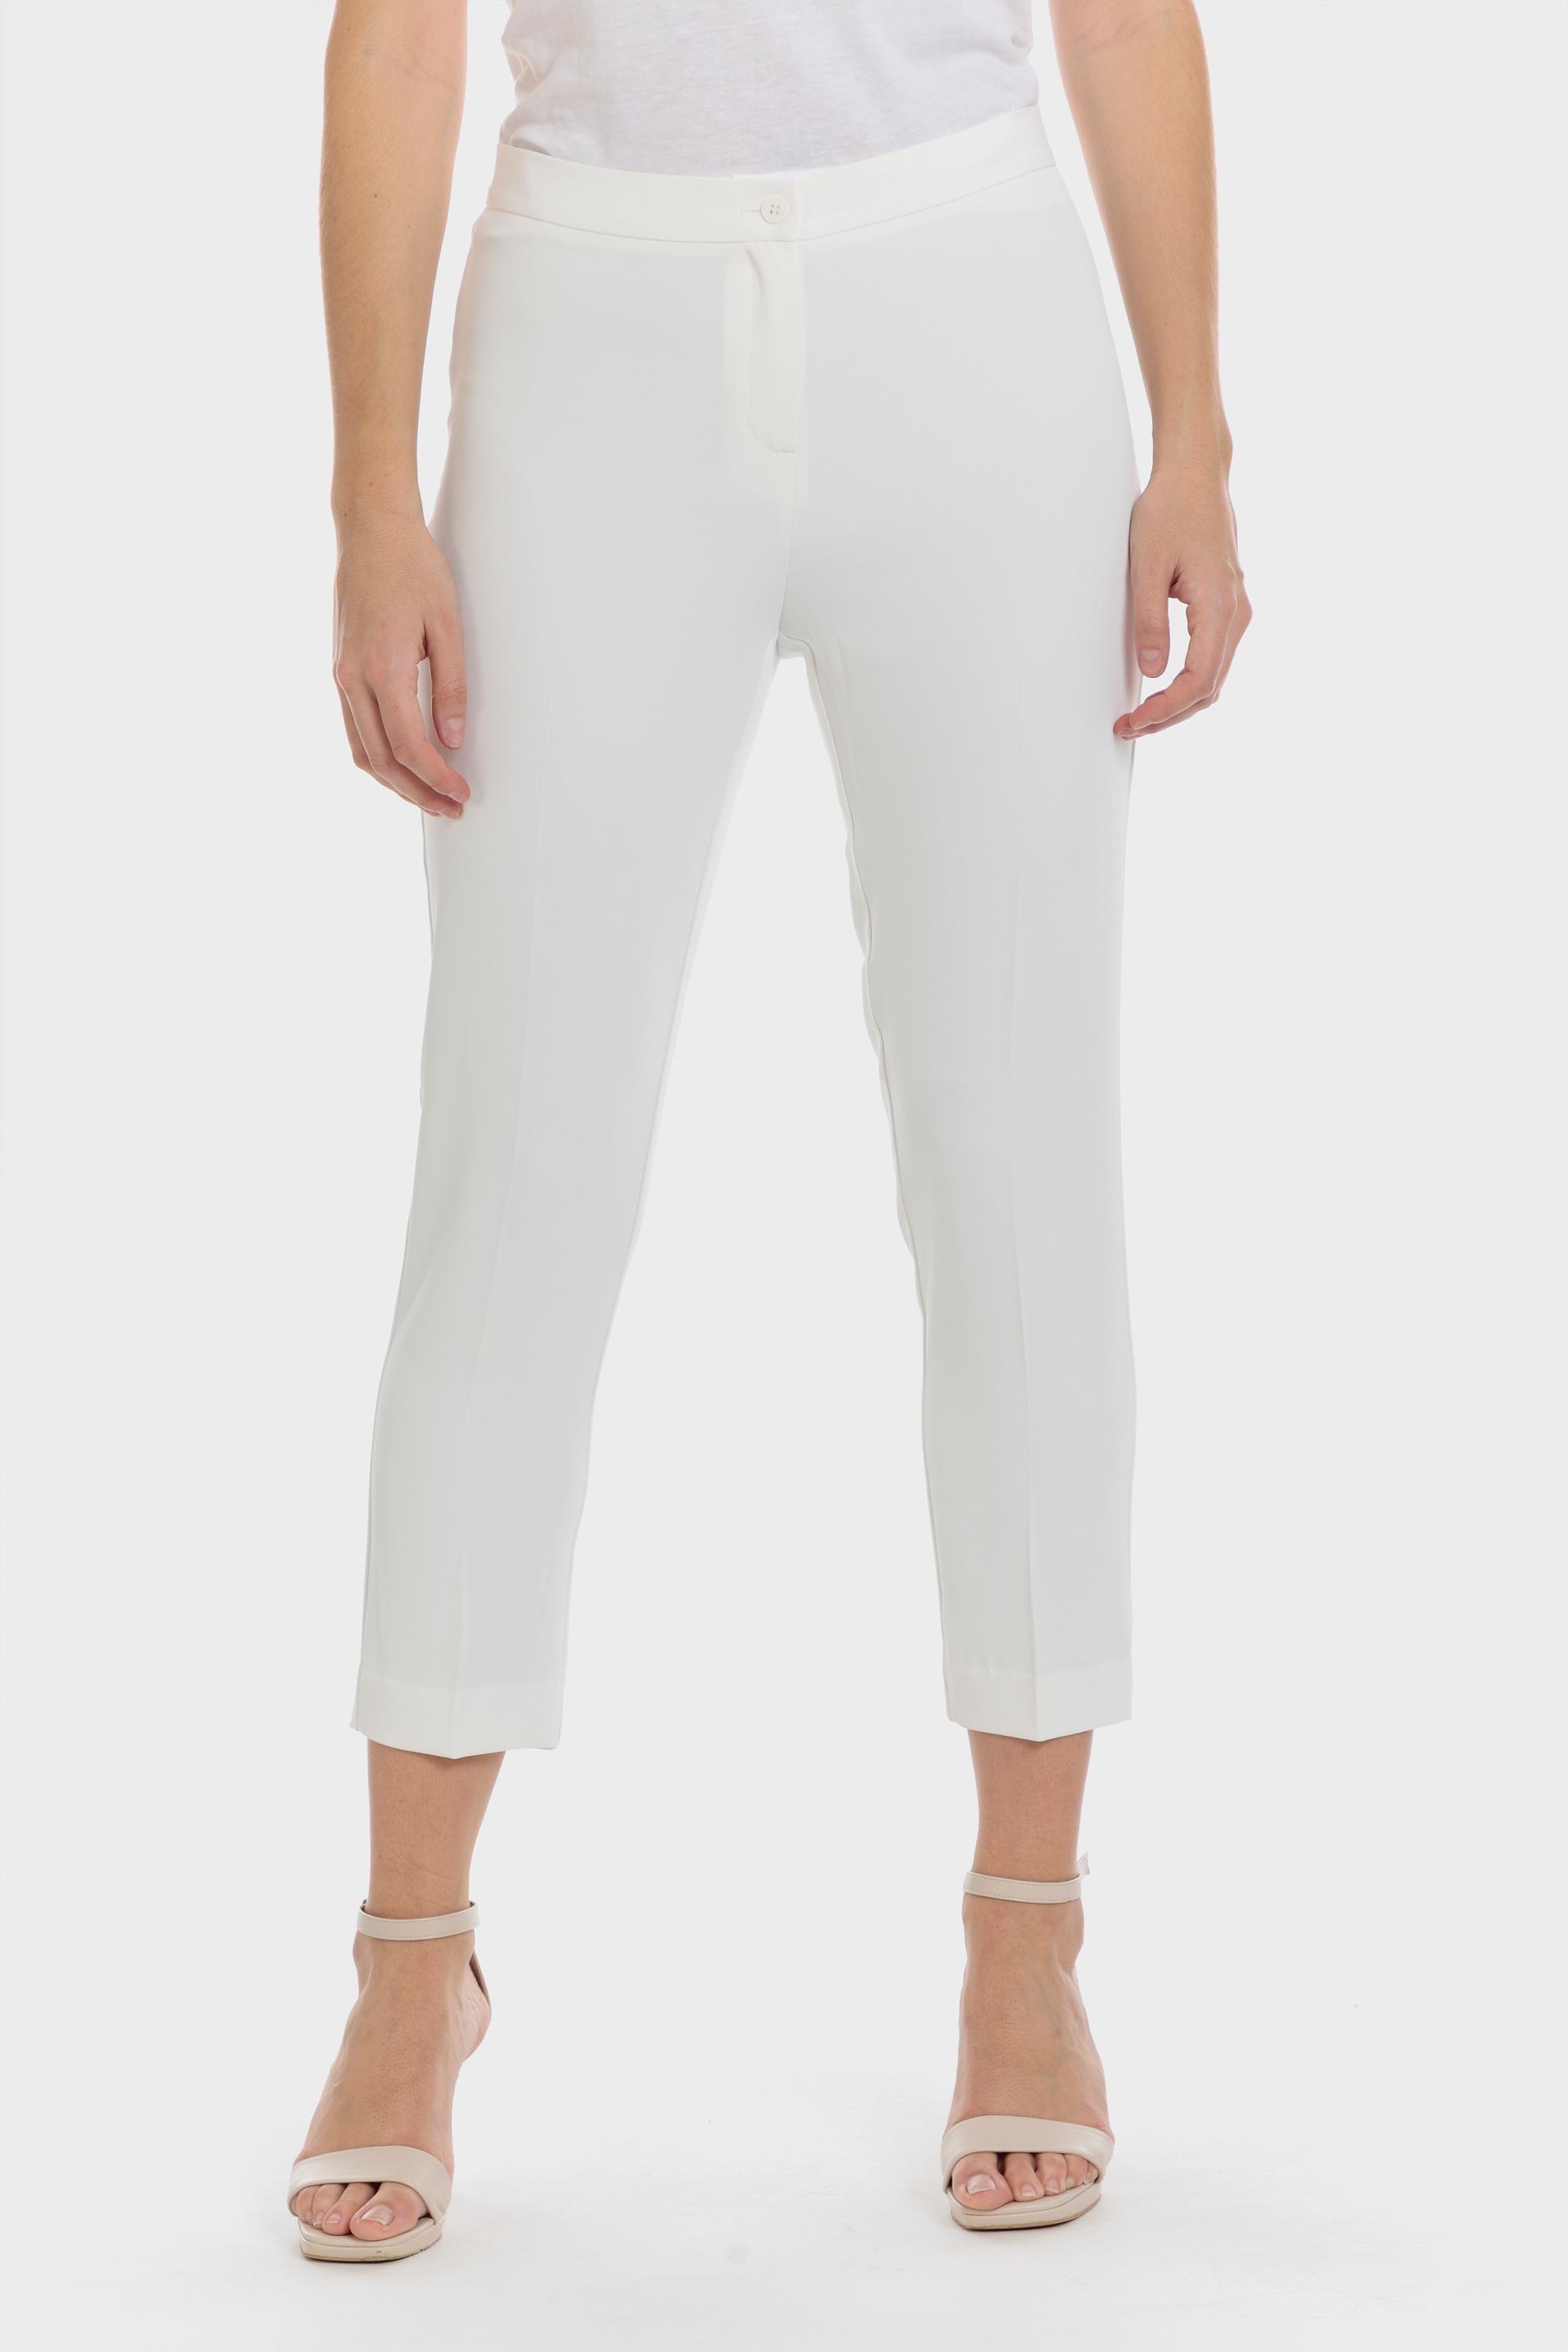 Punt Roma - White Trousers